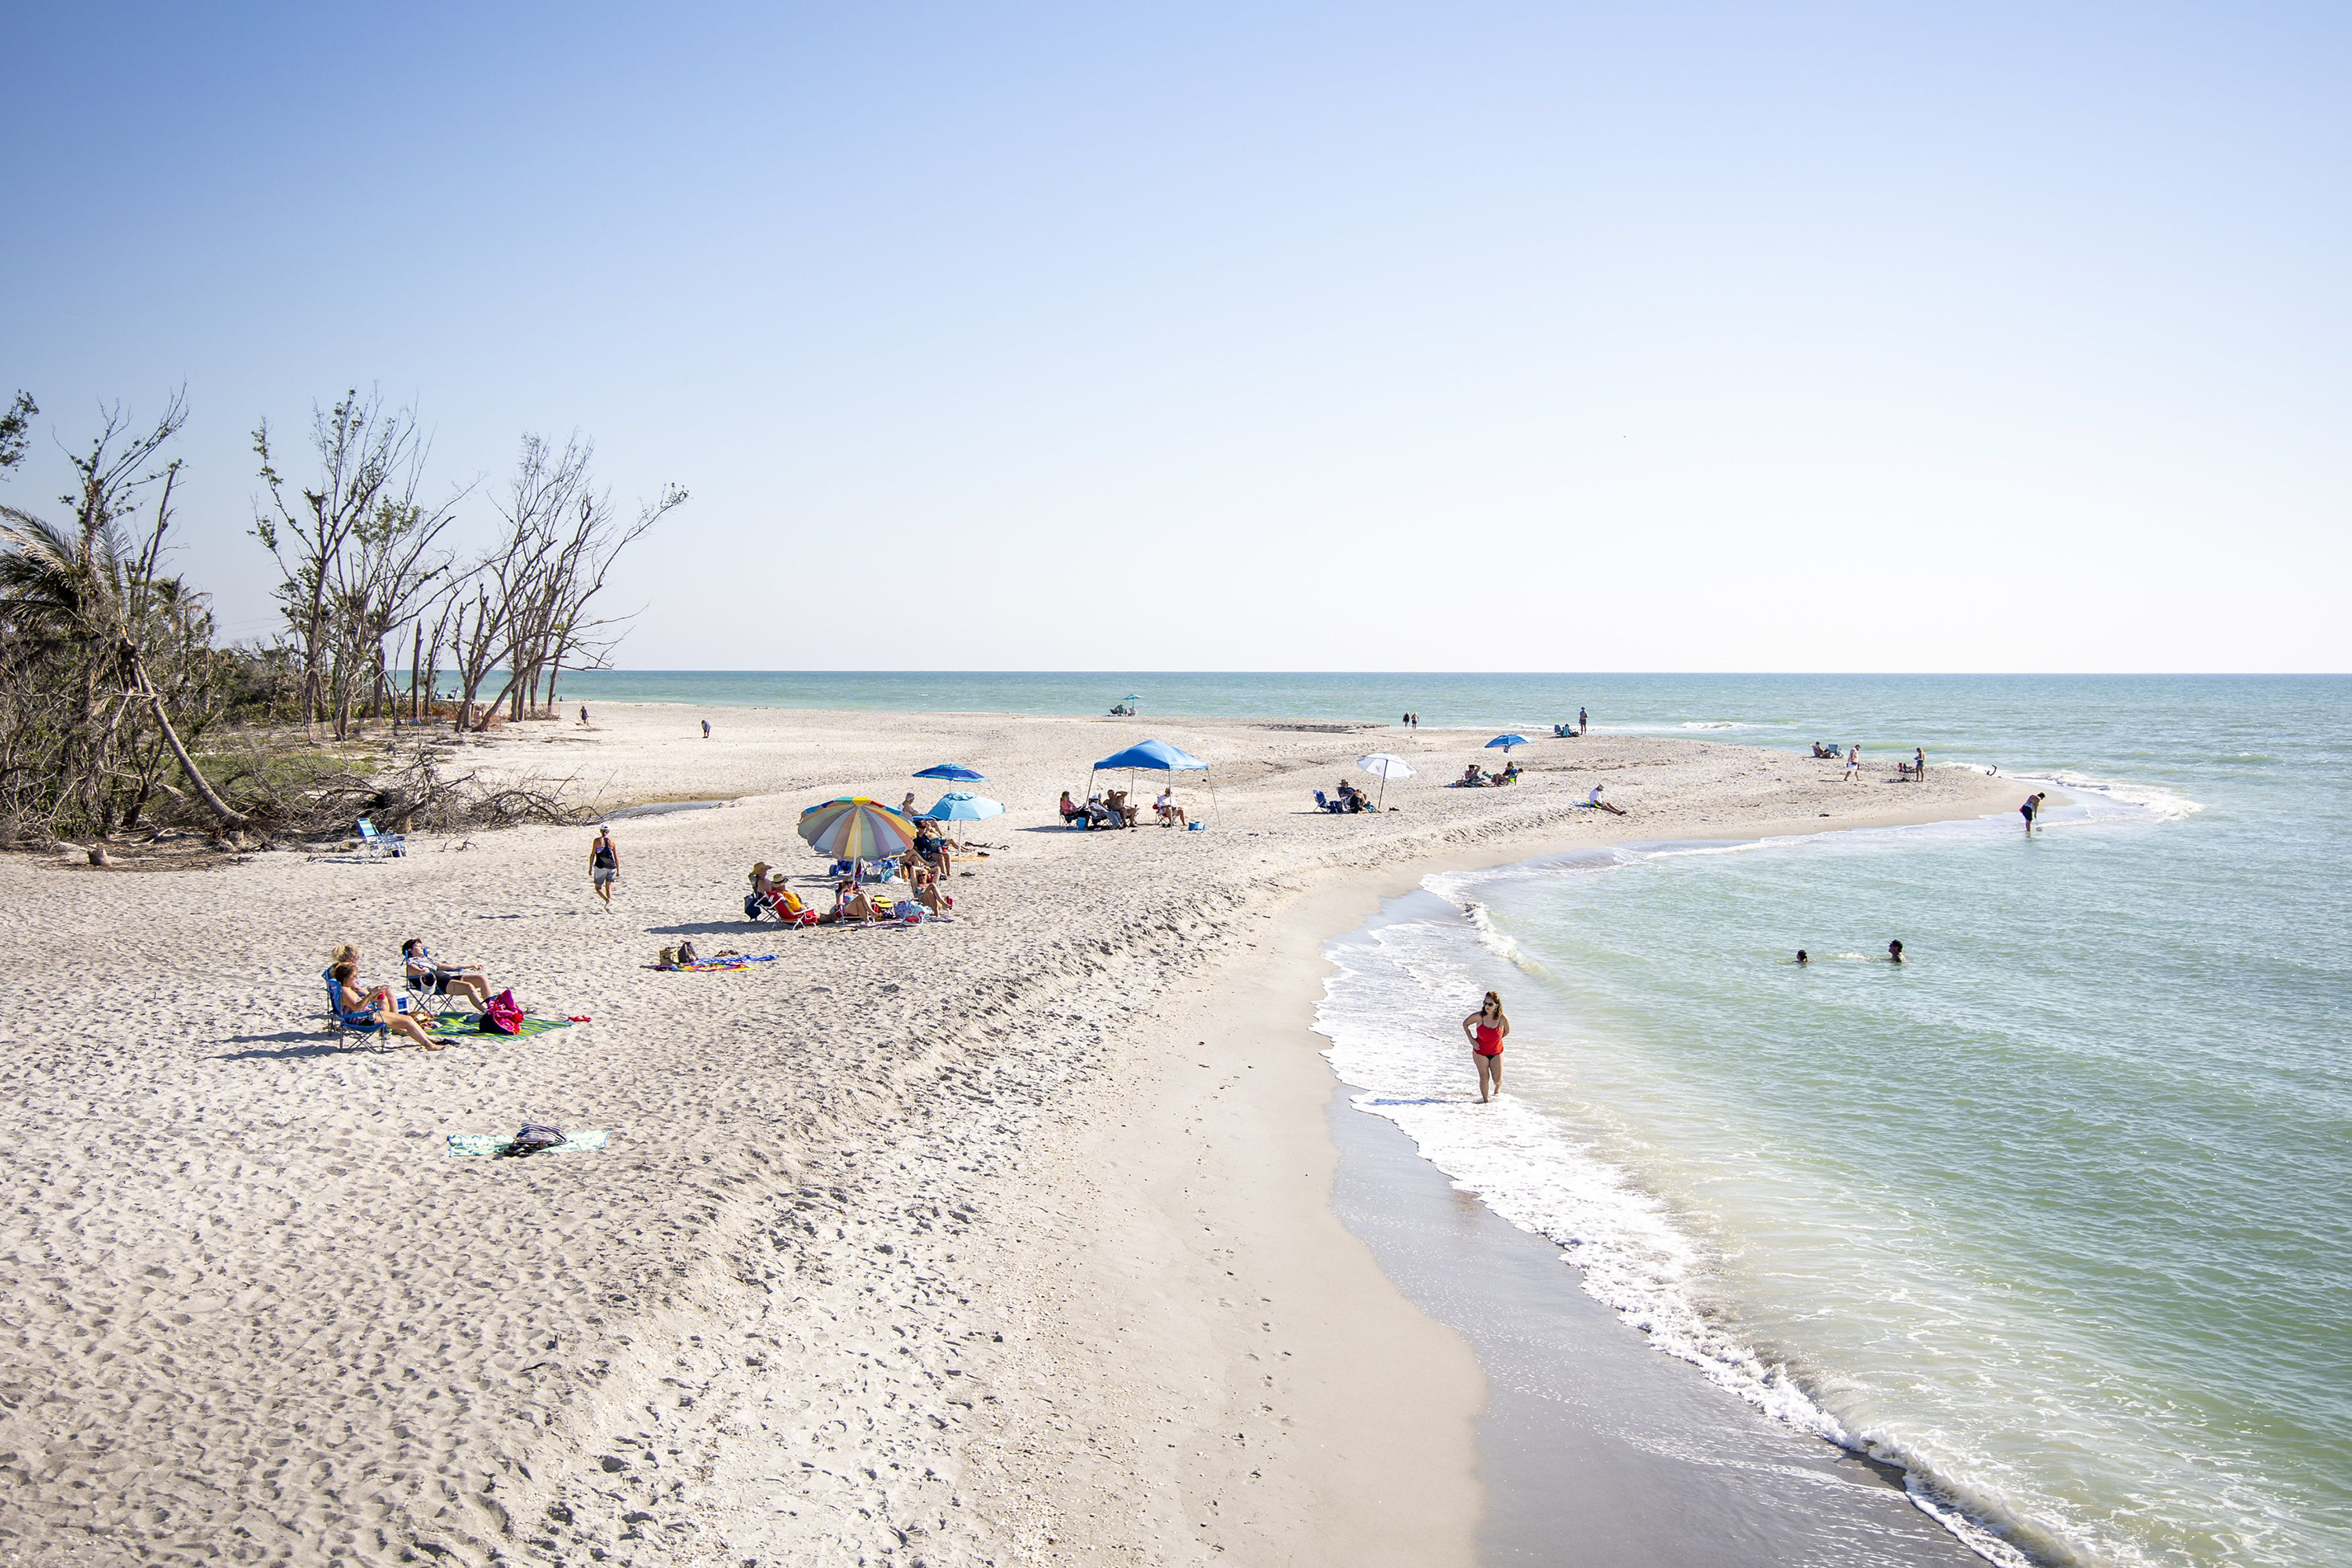 Beachgoers take in some sun at Blind Pass Beach on Sanibel Island on March 1, 2023.